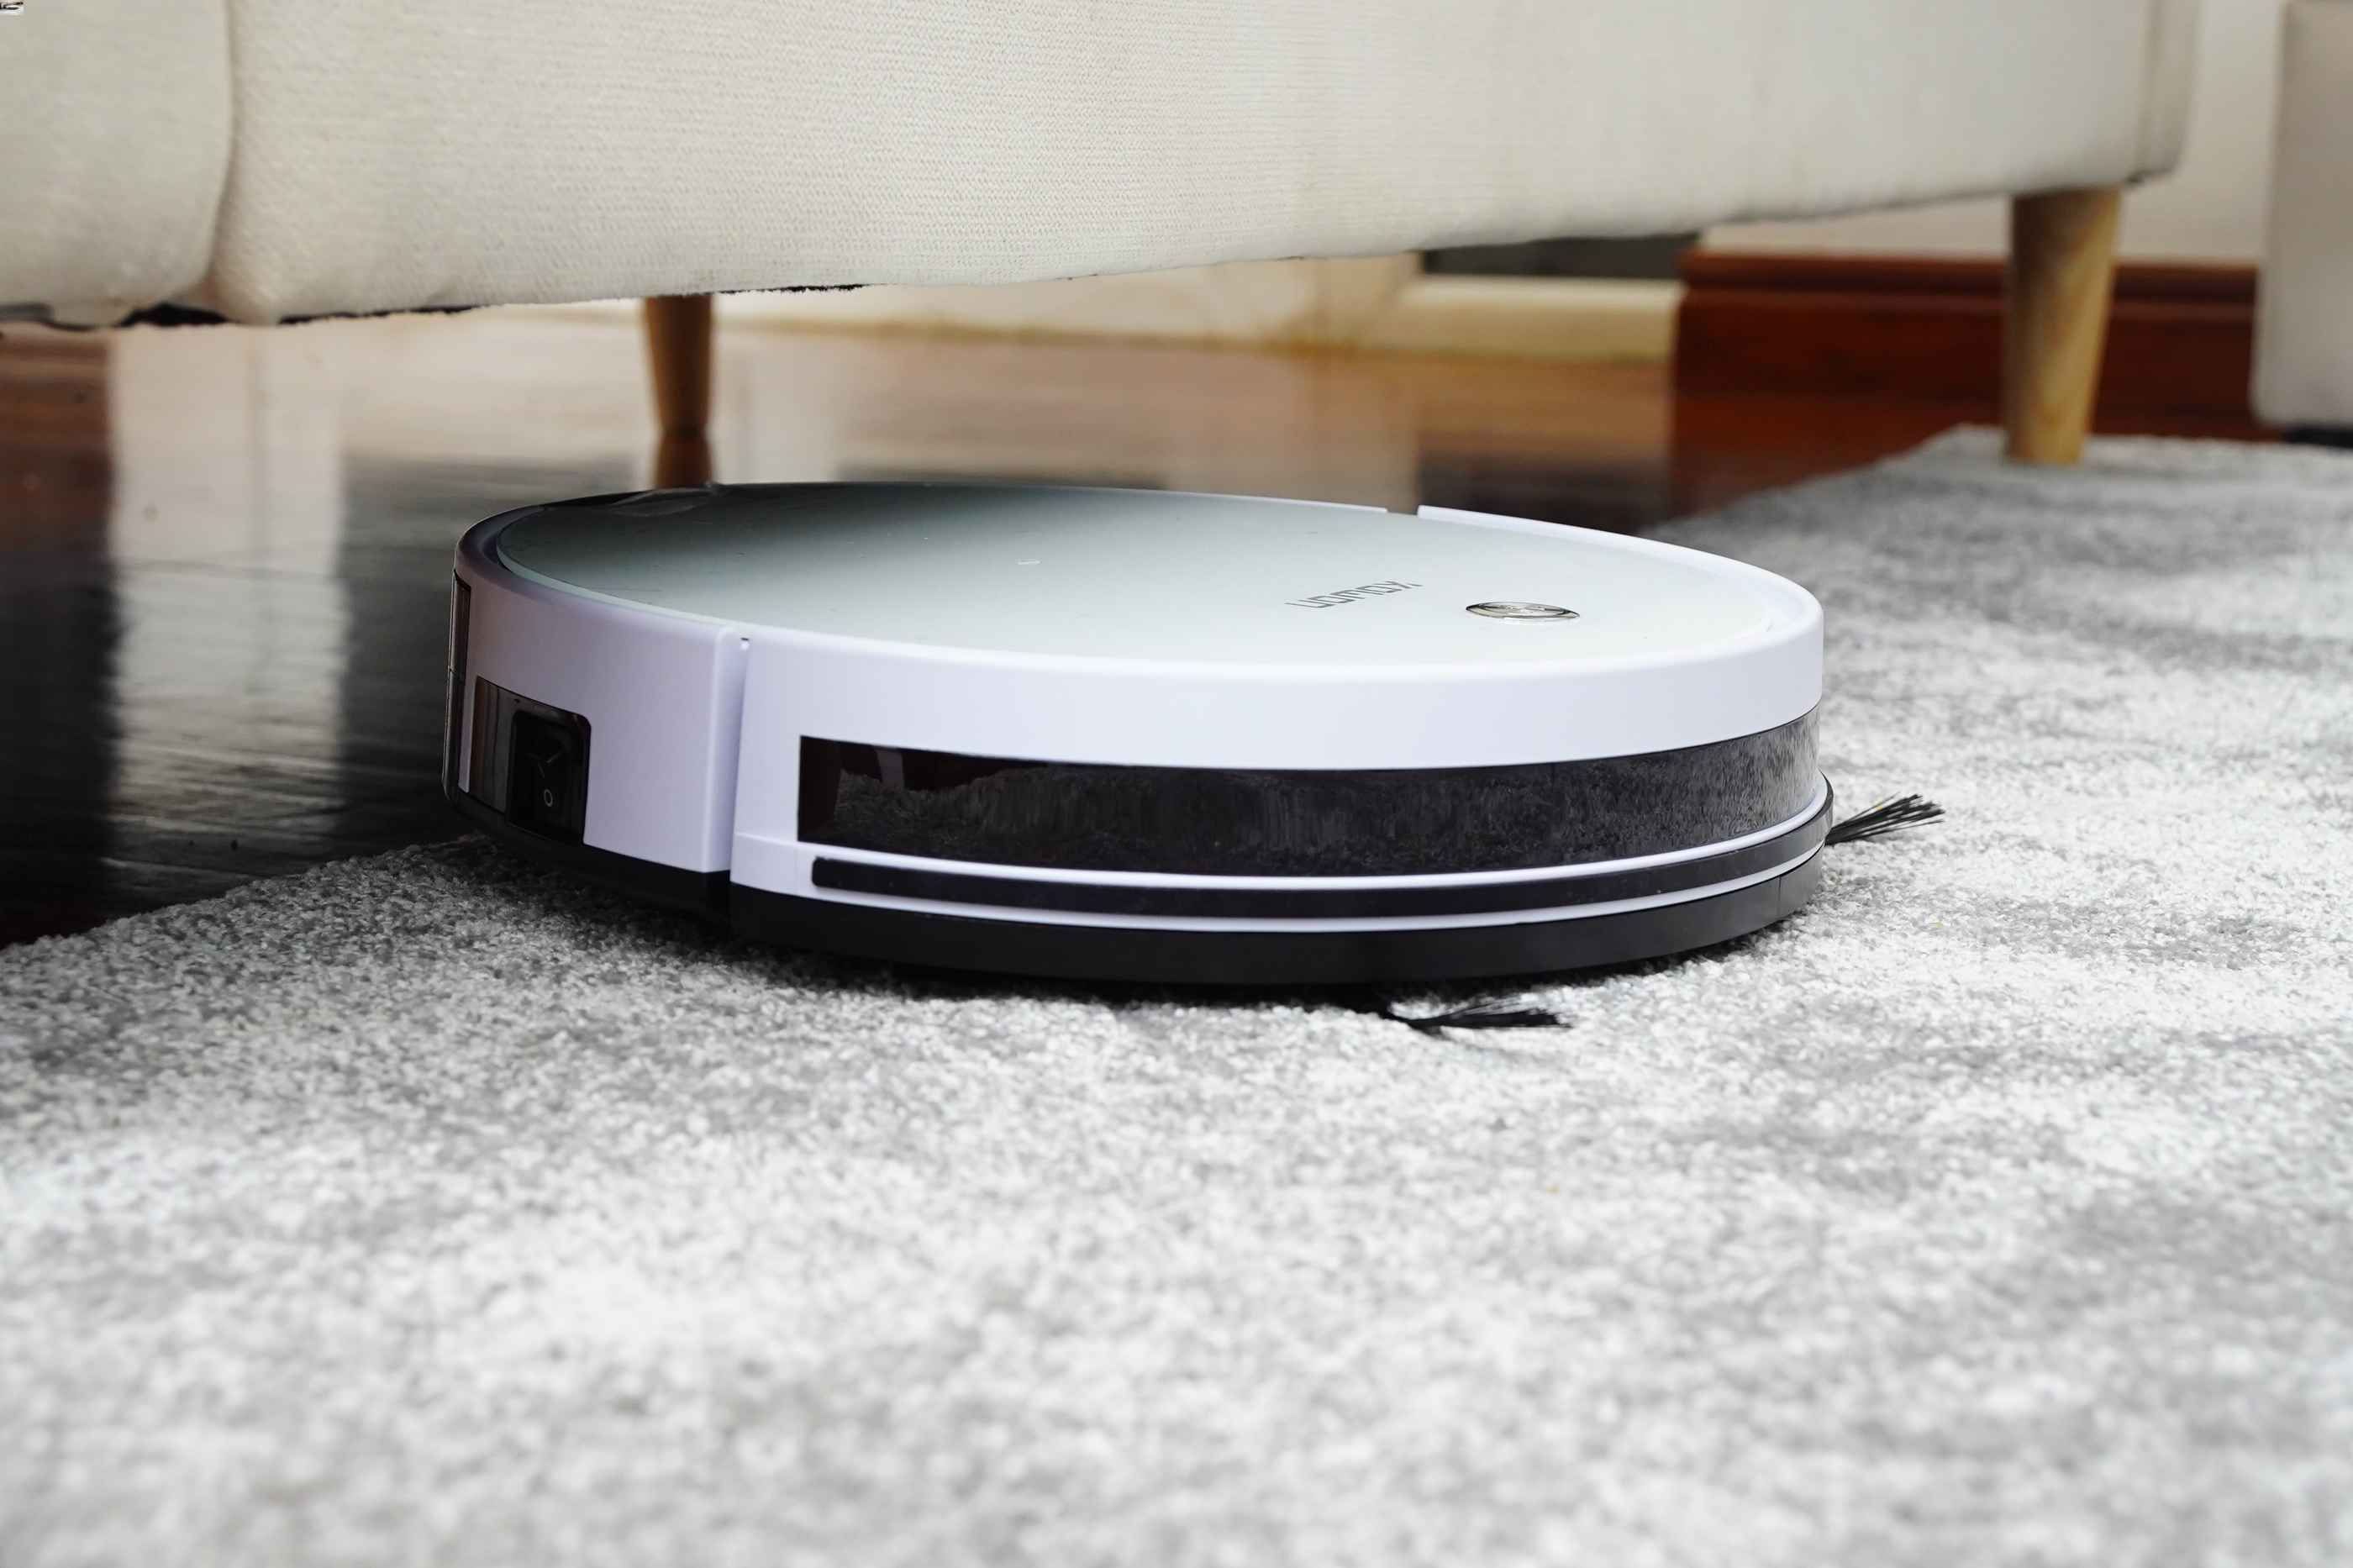 The Best Robot Vacuum Cleaners of 2020